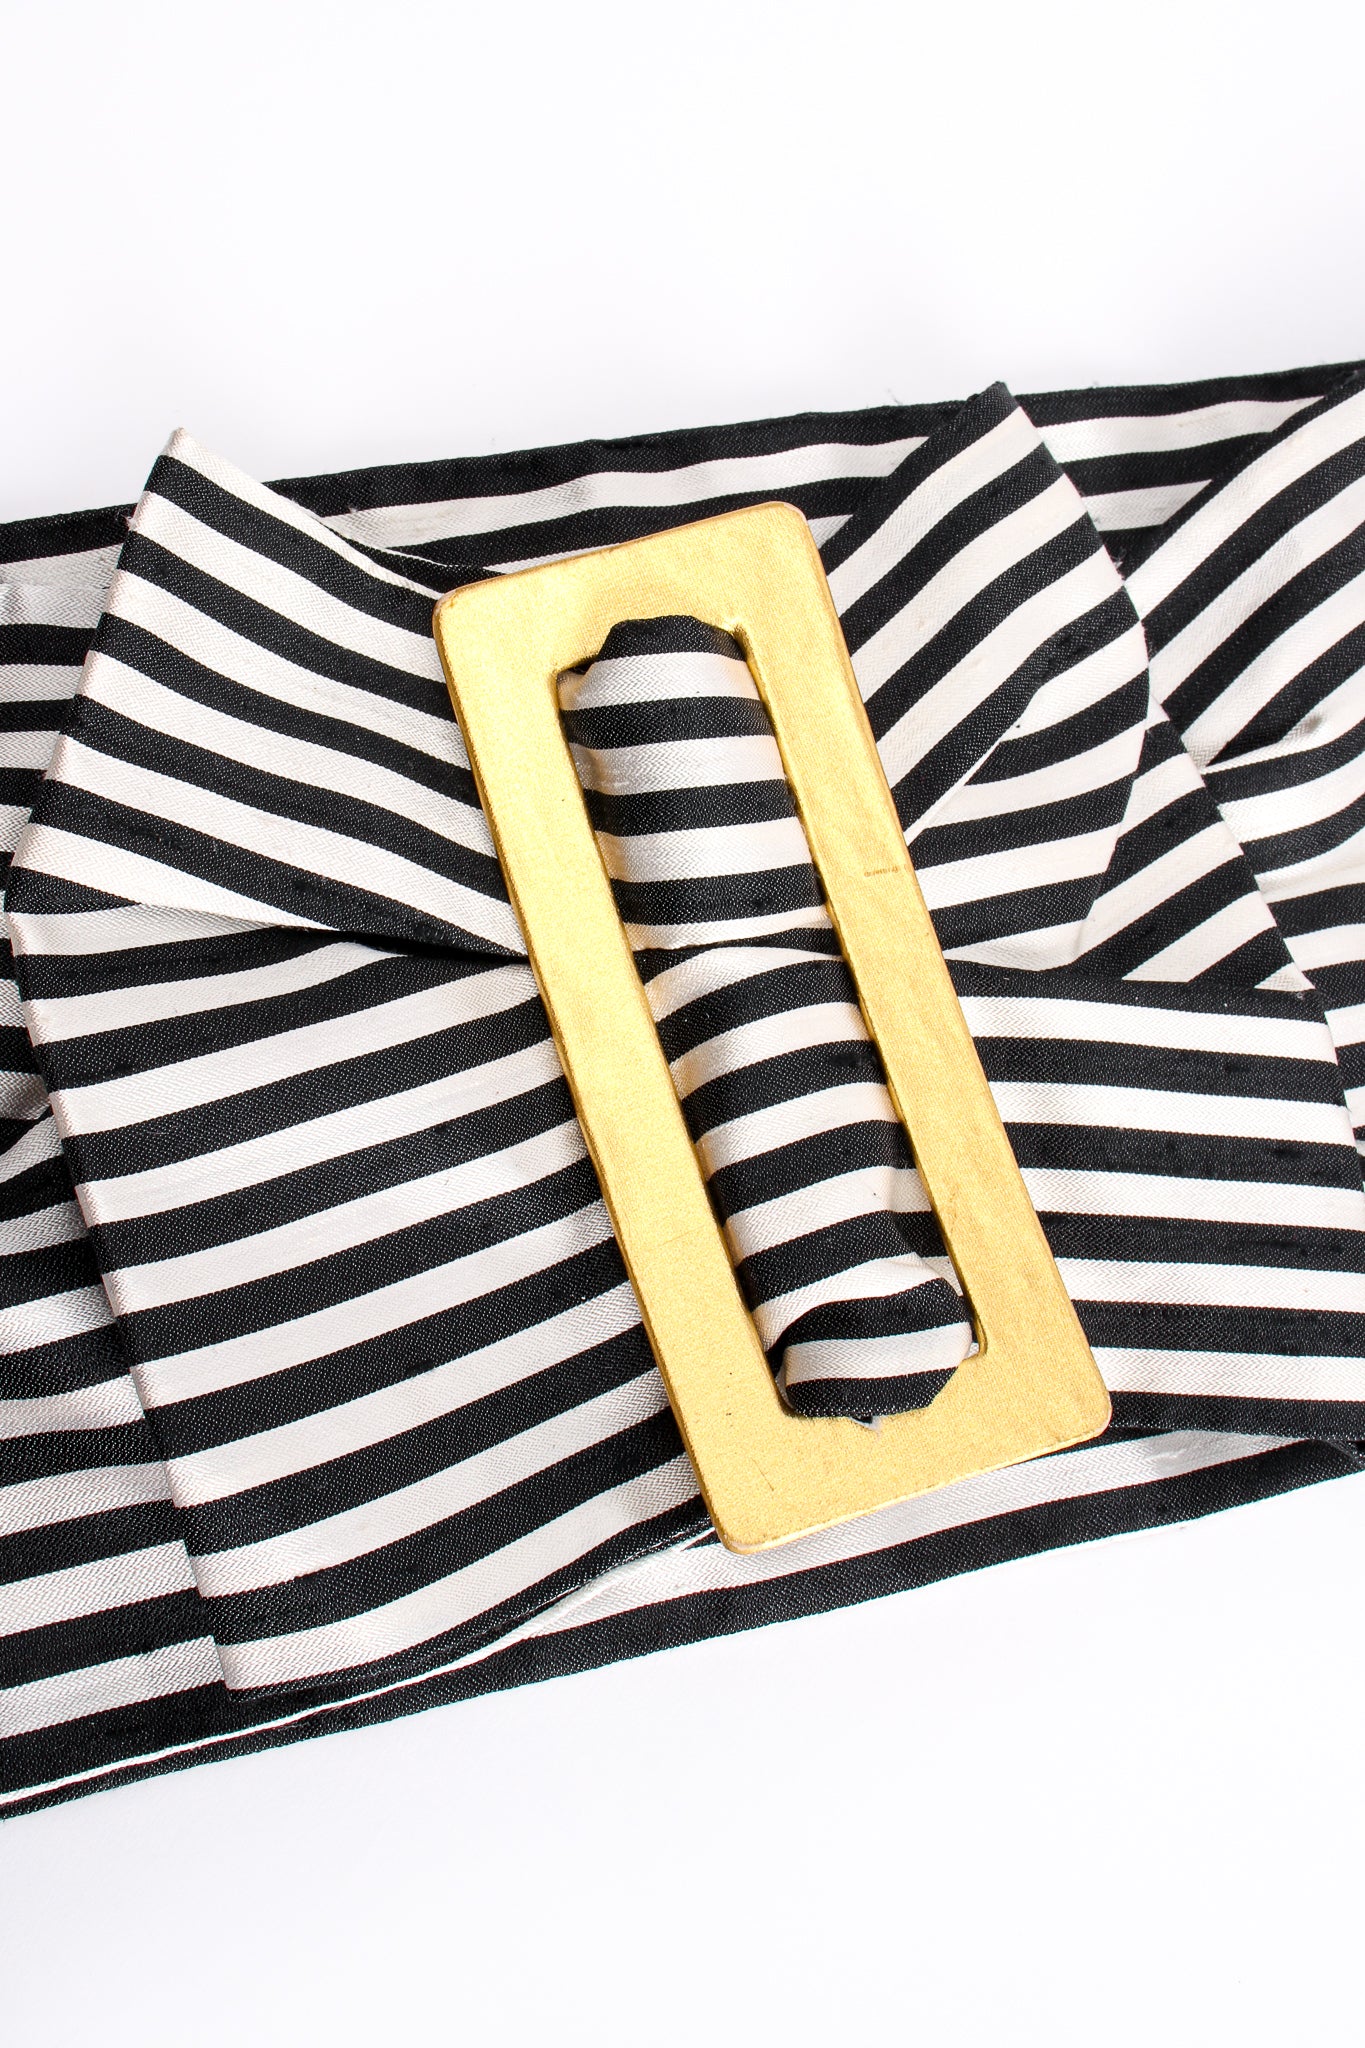 Vintage Paloma Picasso Striped Silk Bow Belt detail at Recess Los Angeles